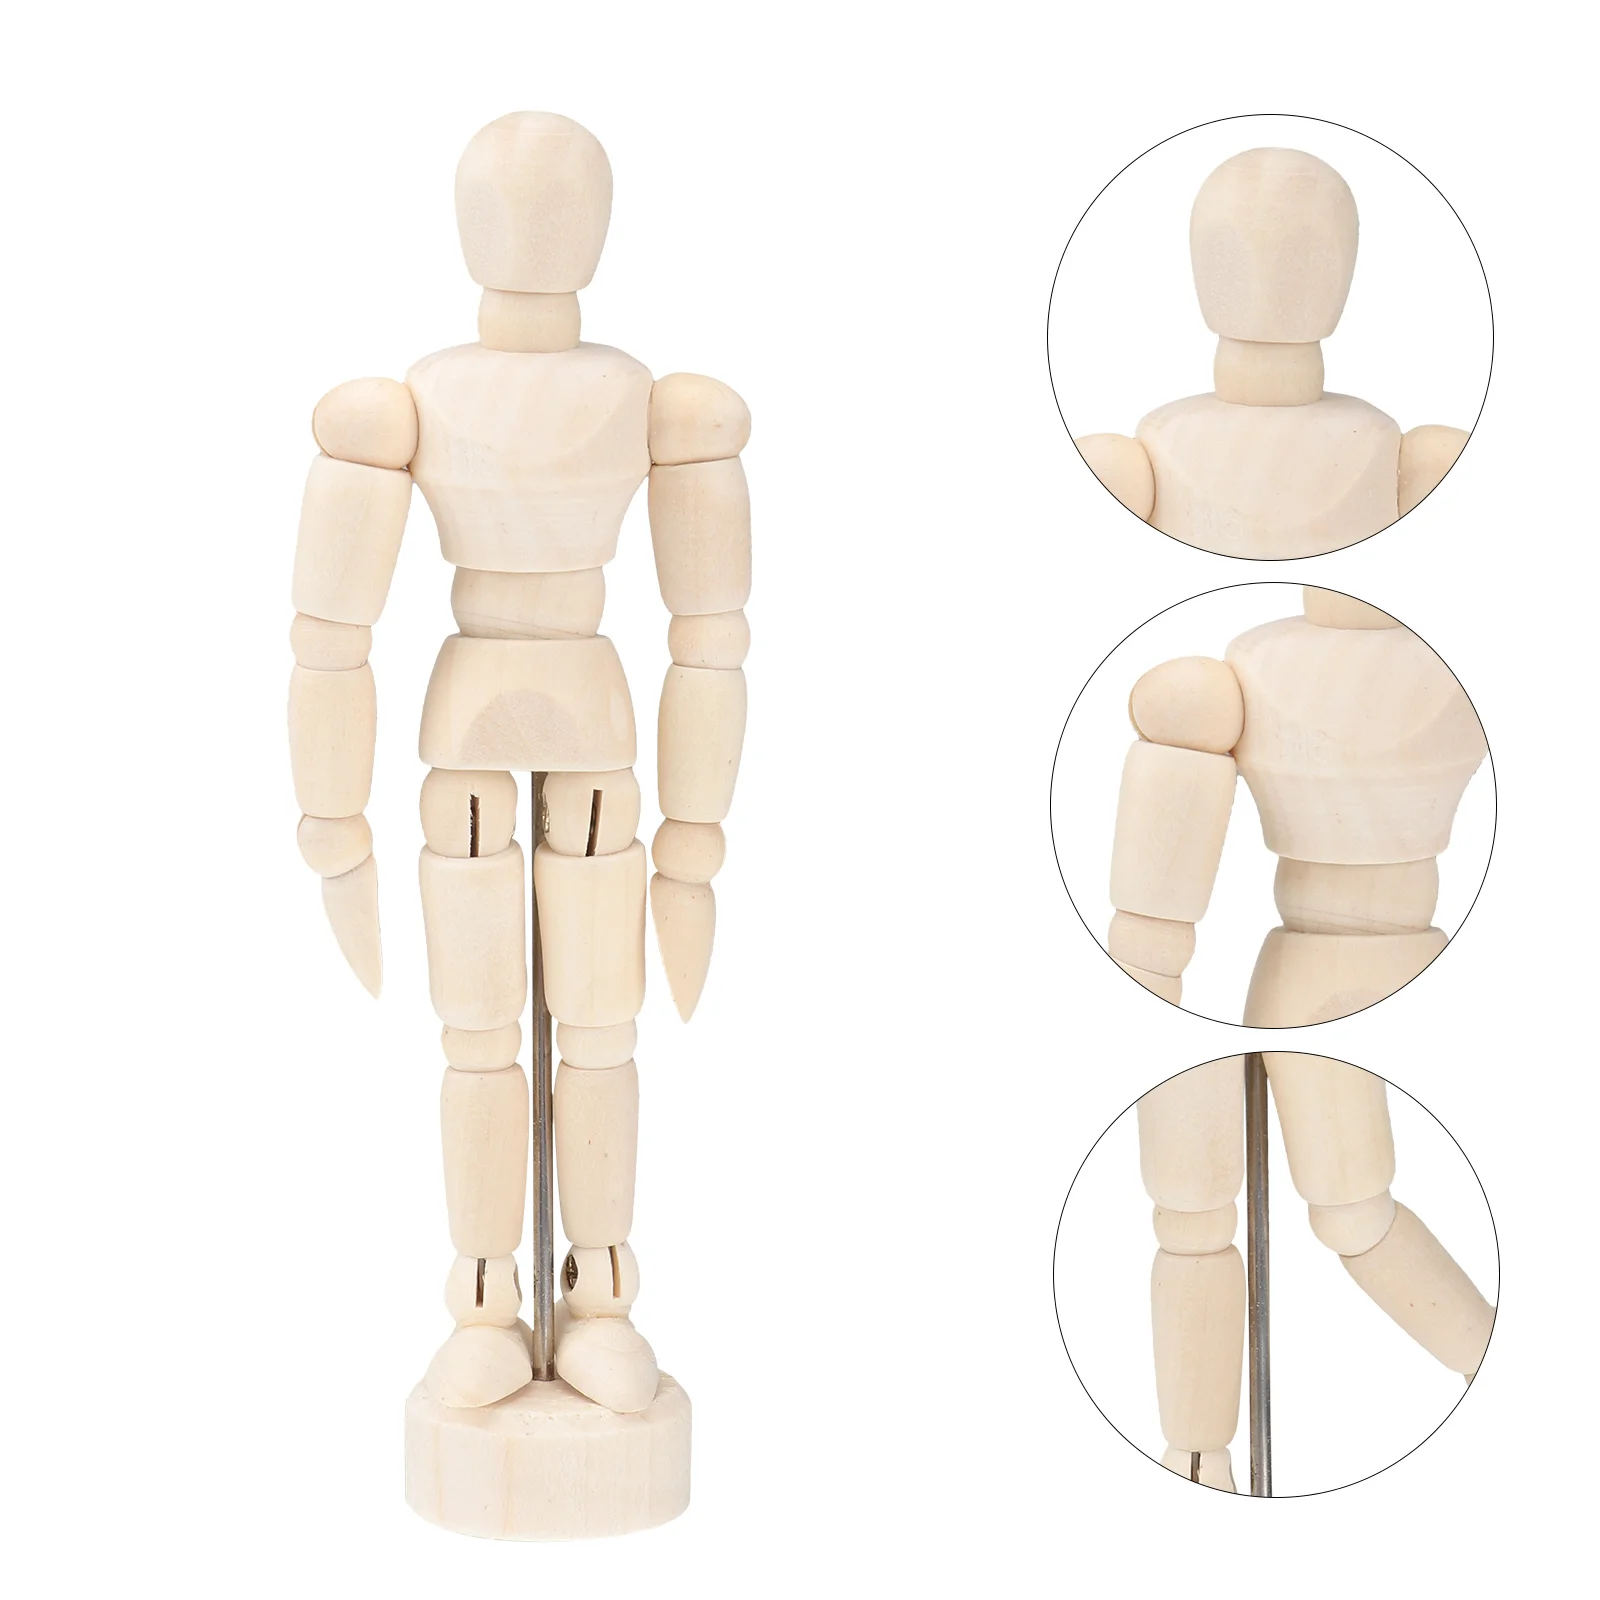 

3pcs 45Inches Wooden Figure Model Human Mannequin Jointed Manikins for Artists Sketch Home Office Desk Decoration (Beige)